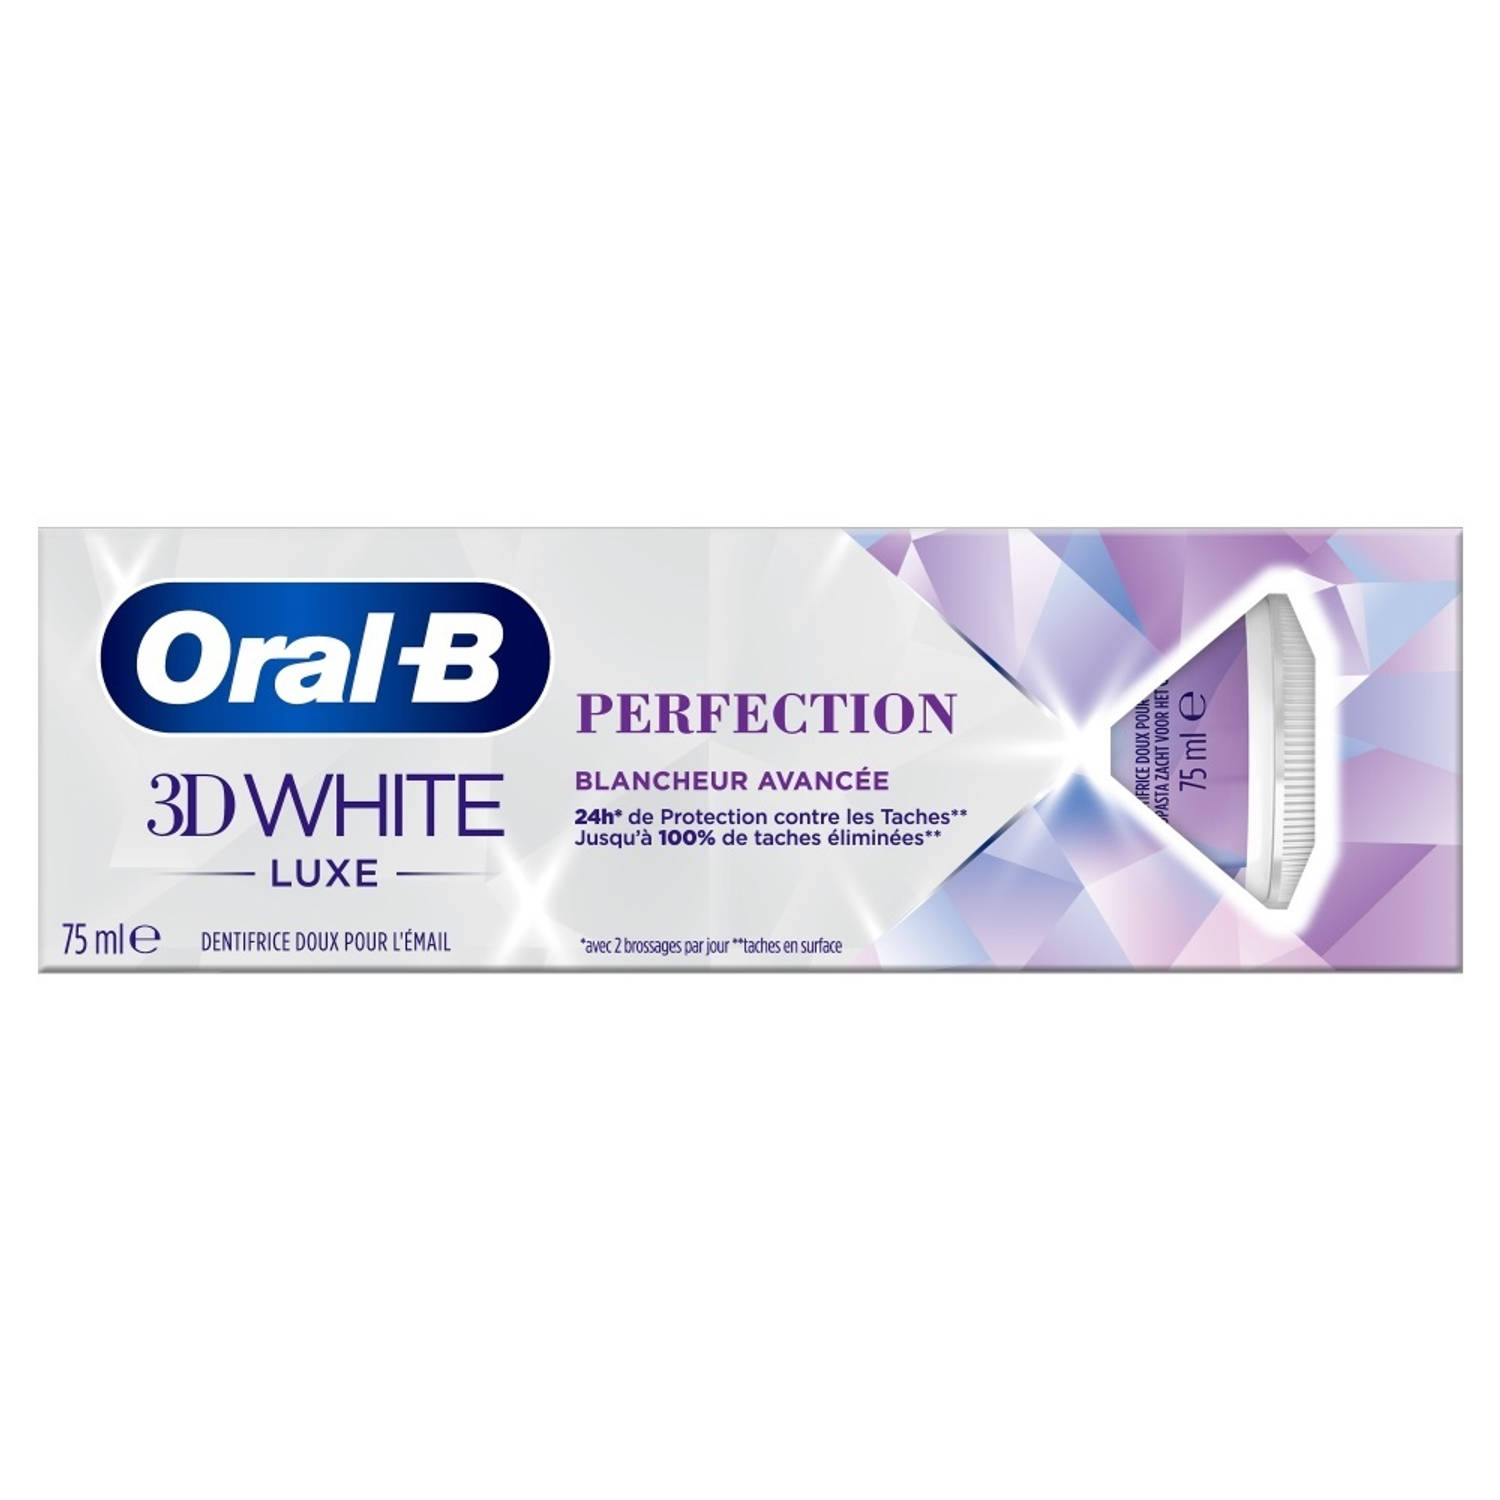 Oral-B 3D White Luxe Tandpasta Perfection 75 ml